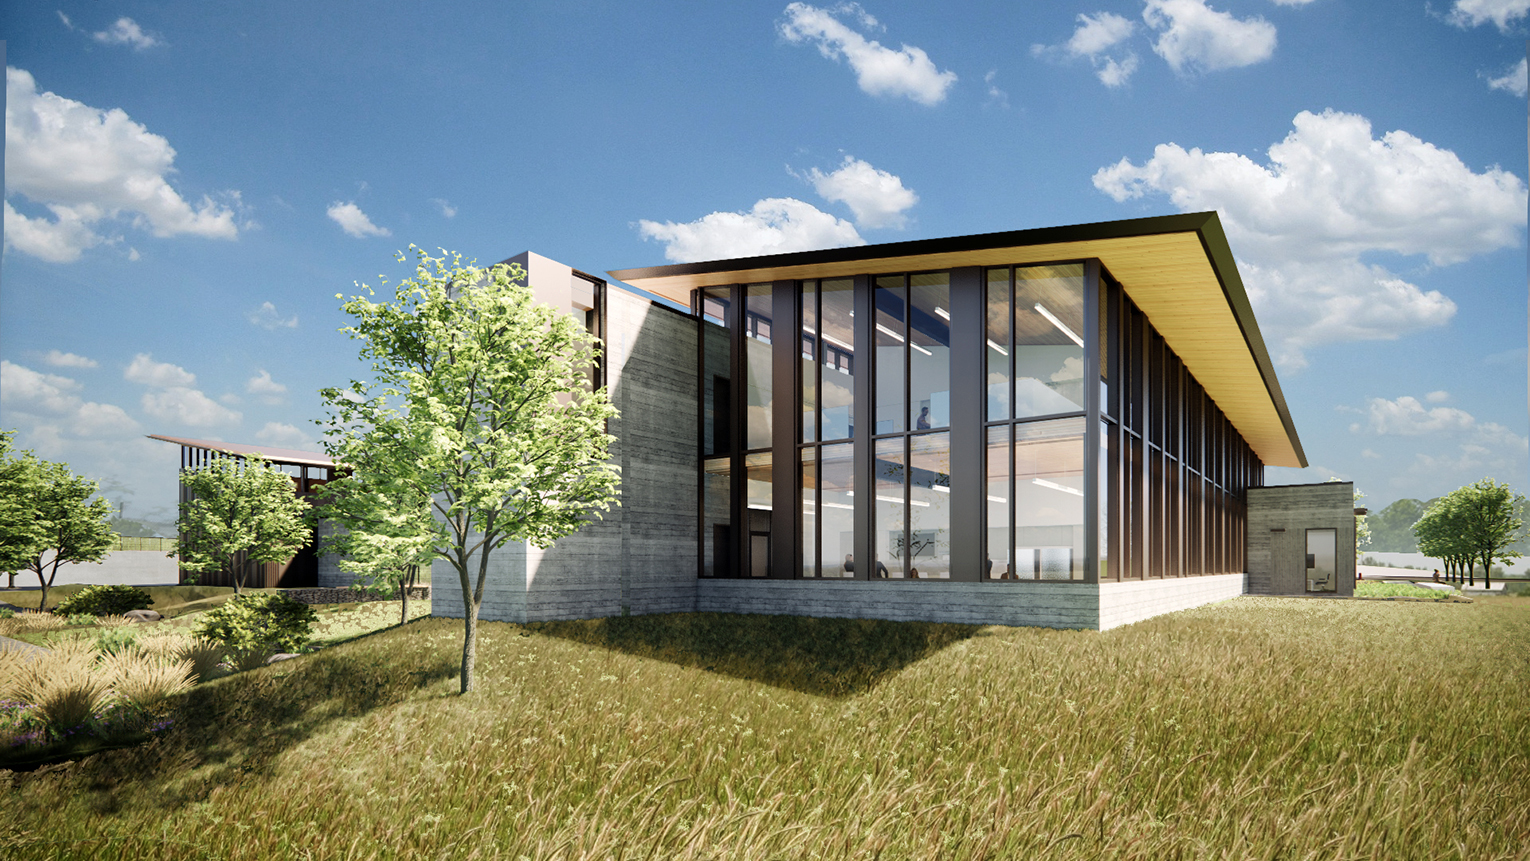 Sunrise Water Authority Administrative & Field Operations Facility. Exterior rendering of a two-story, glass-walled administrative building on a grassy site with small trees. Blue skies and white clouds above.